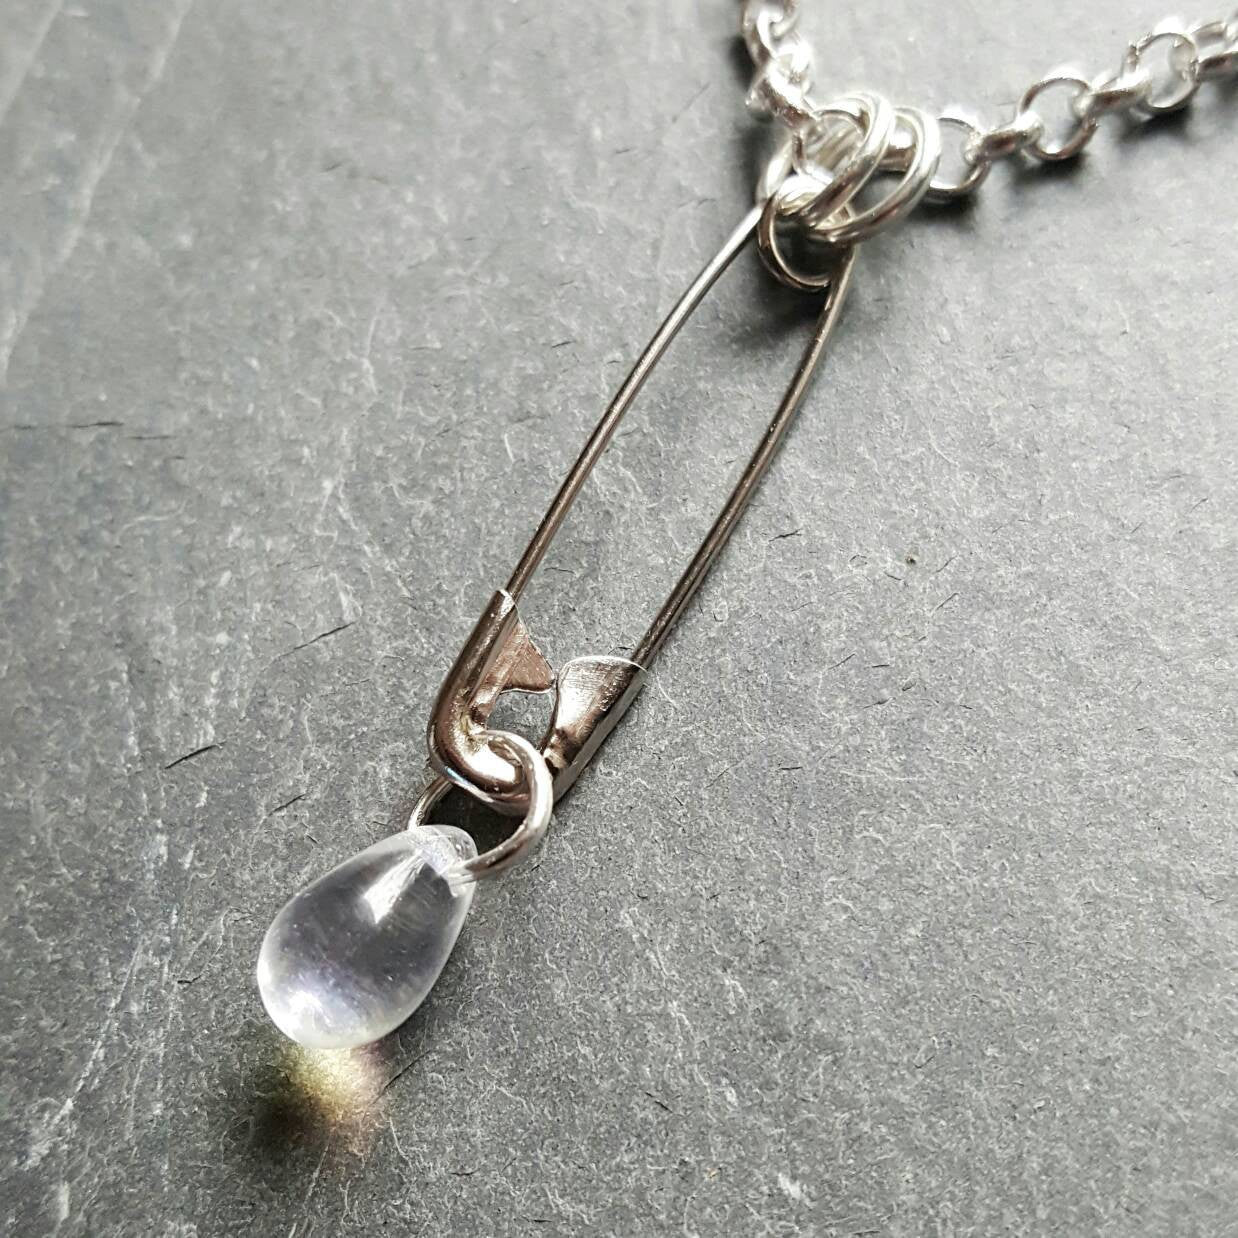 Safety Pin Teardrop Necklace Safety Pin Jewelry You Are Safe With Me Movement - DRAVYNMOOR